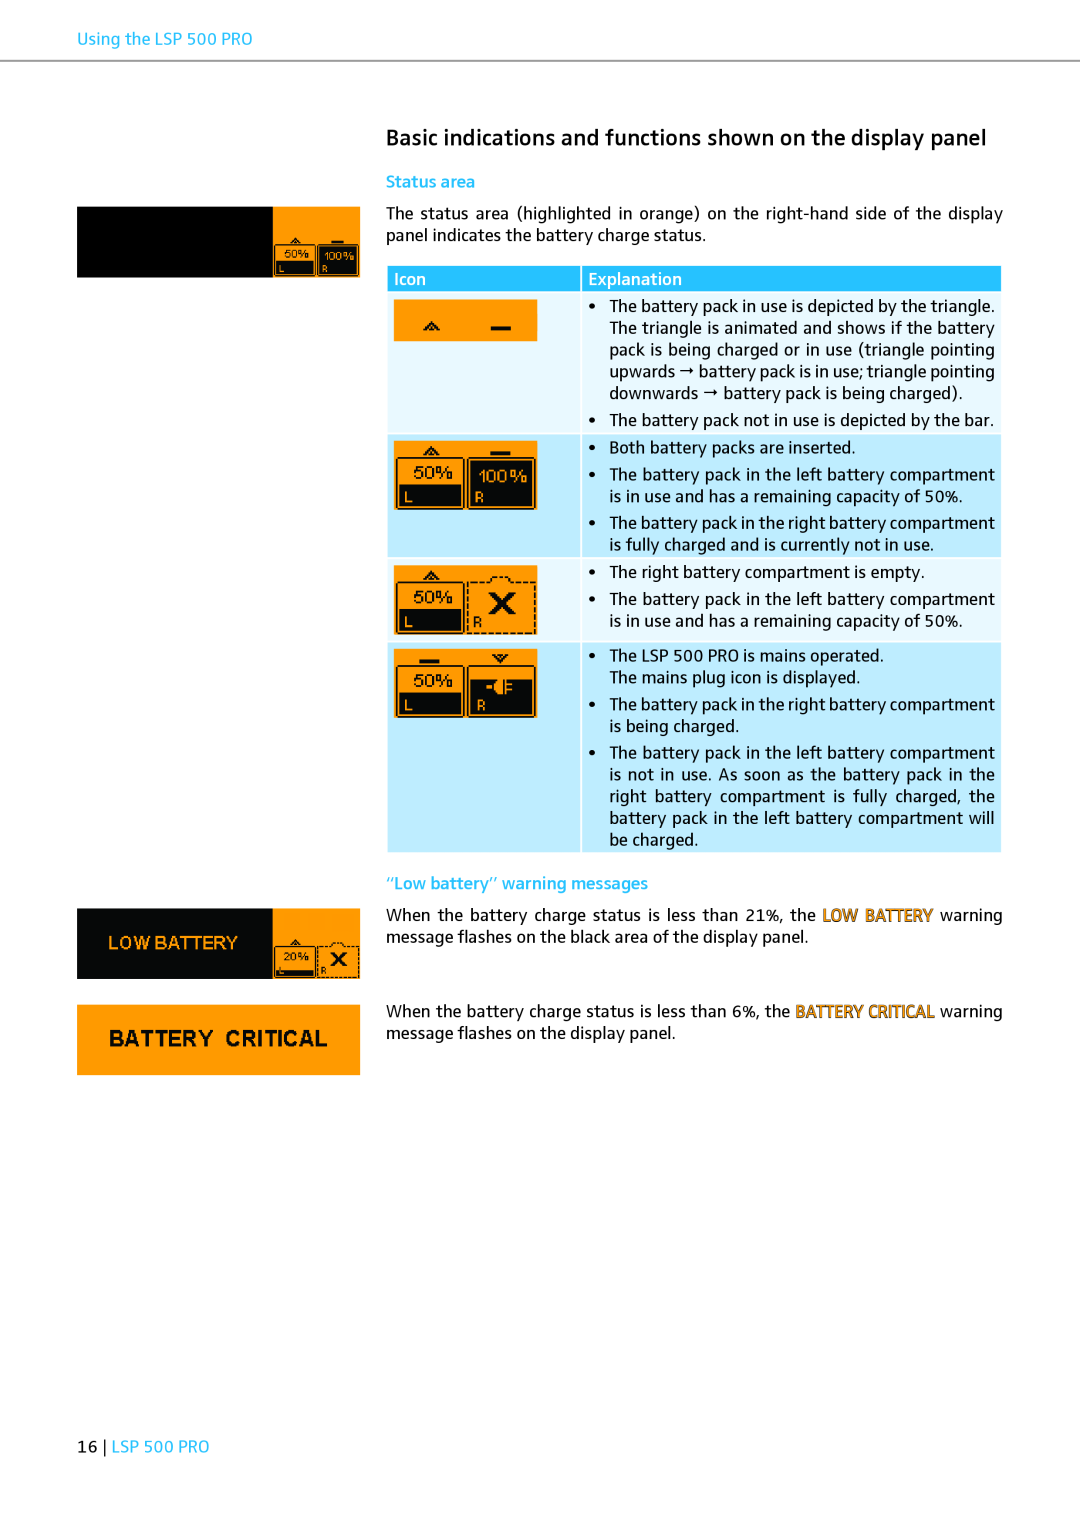 Sennheiser instruction manual Status area, Explanation, “Low battery” warning messages, Using the LSP 500 PRO, Icon 